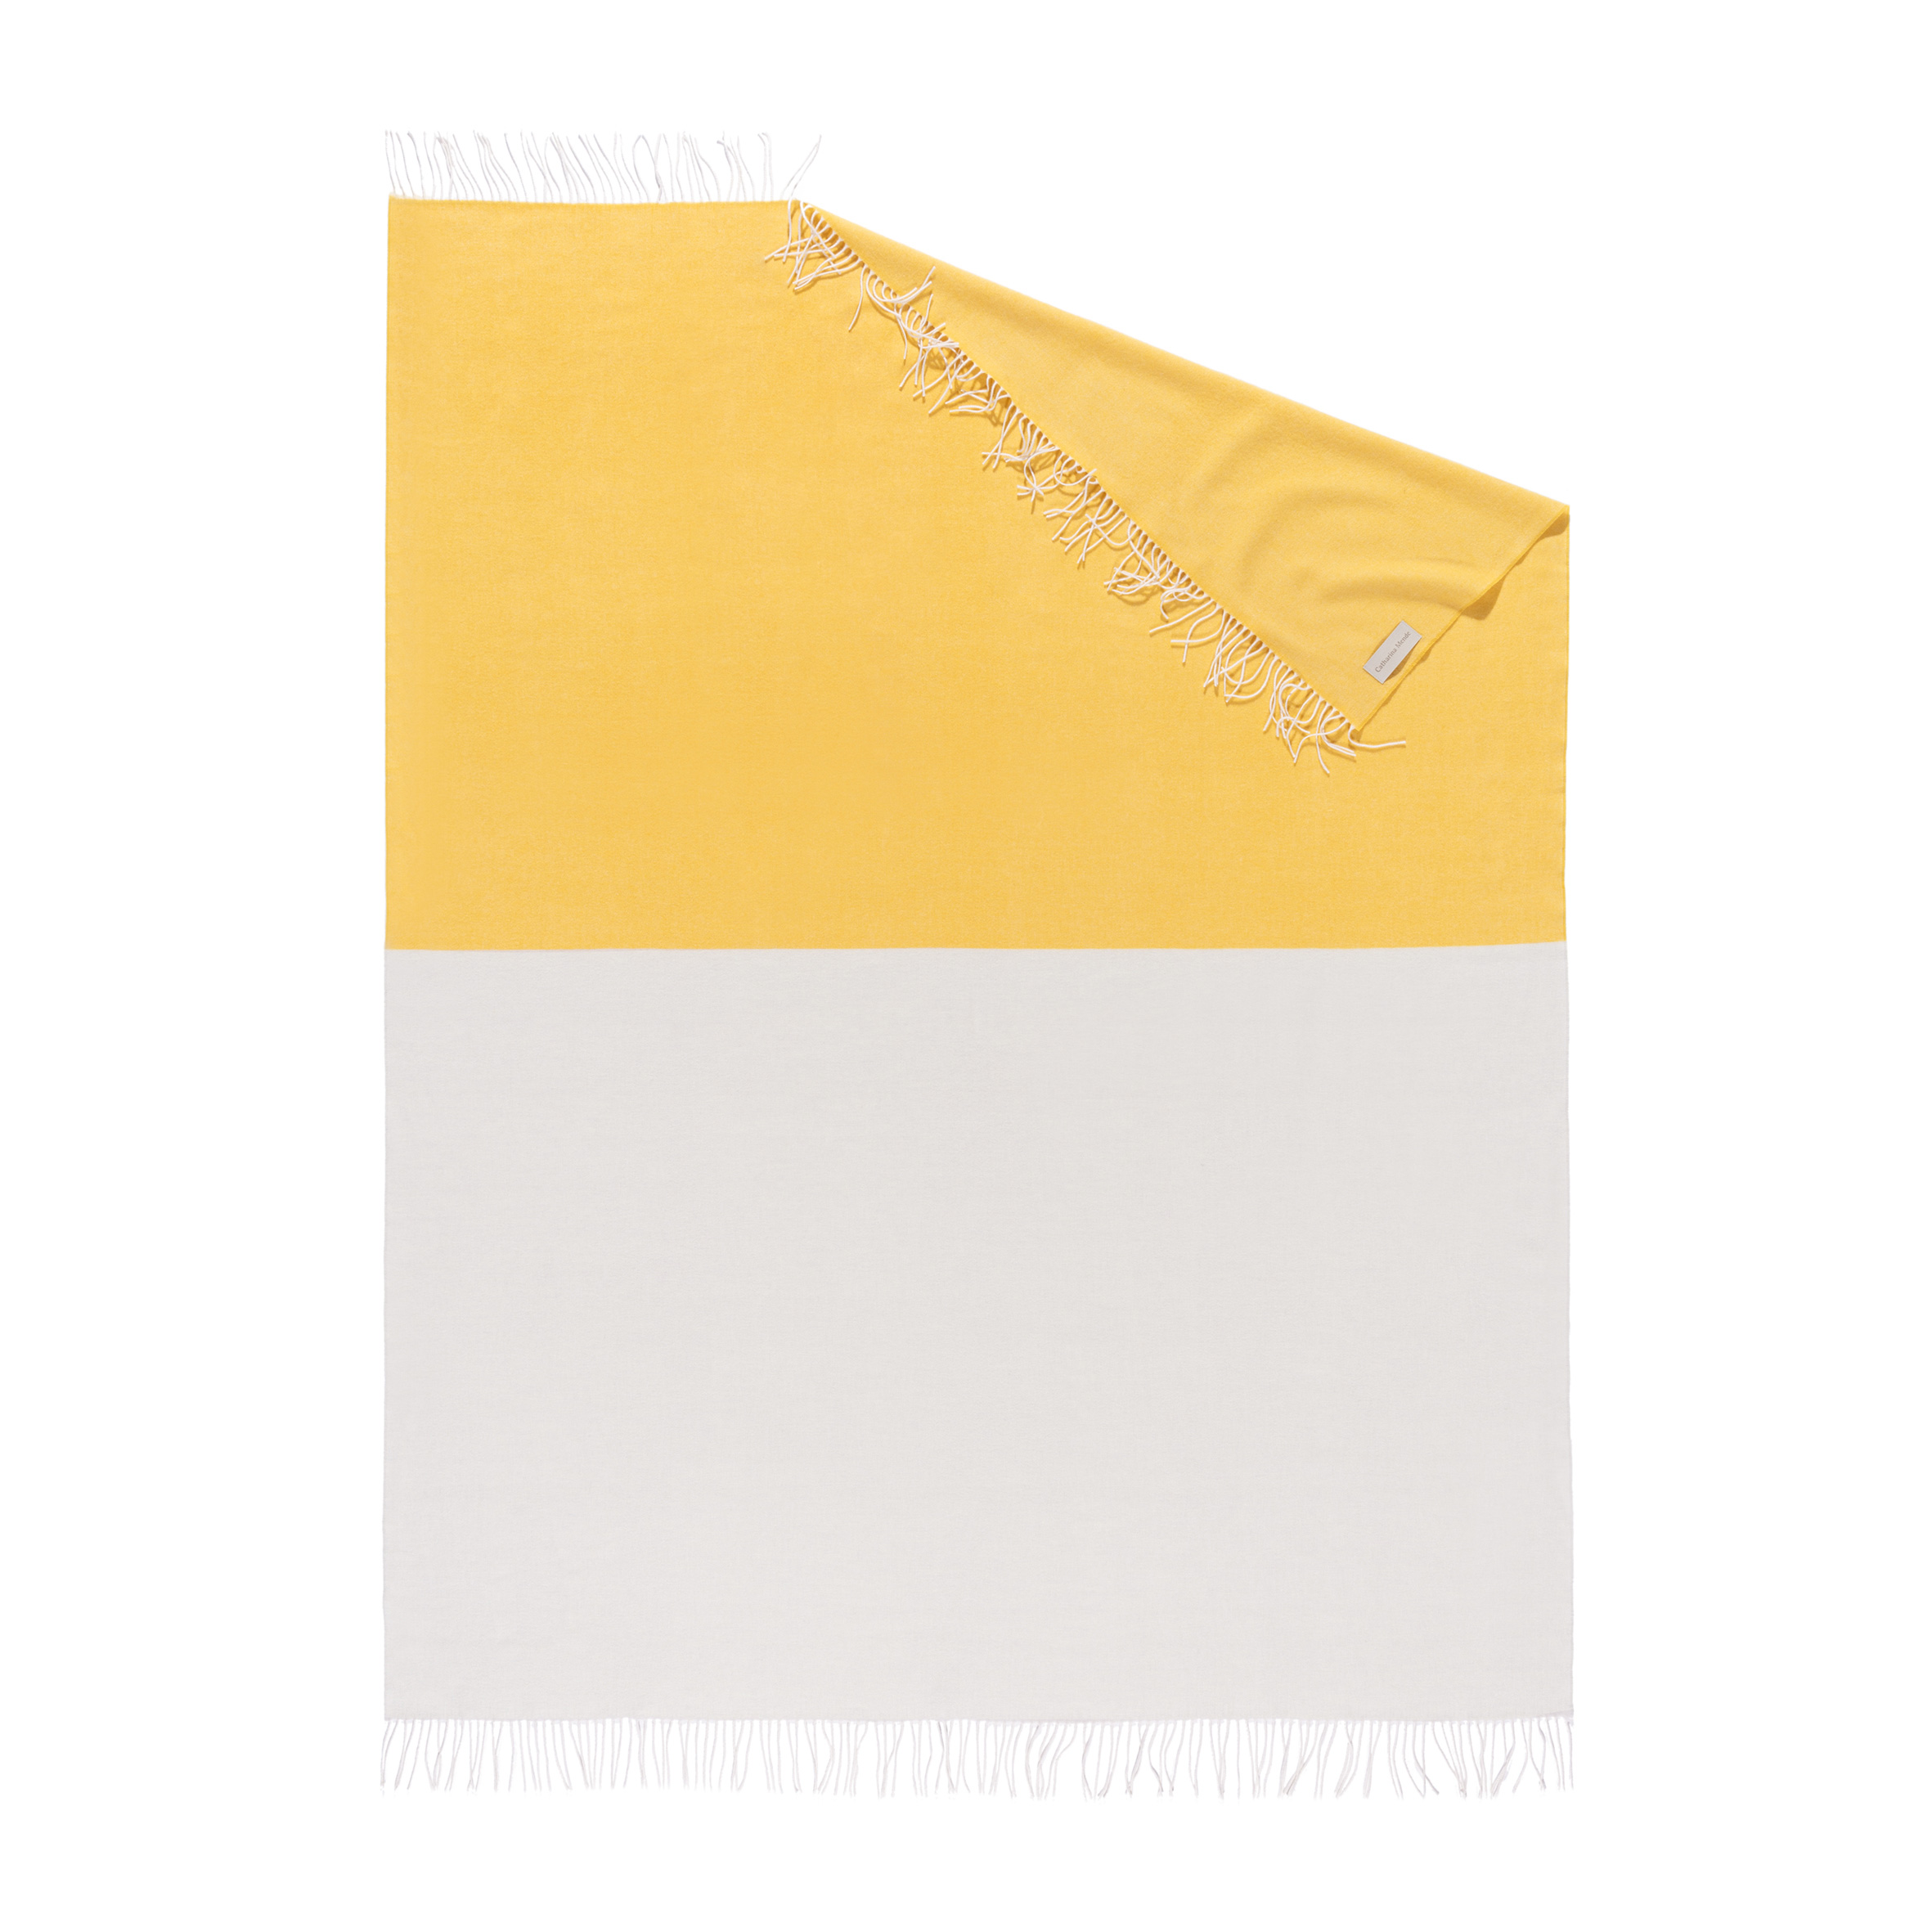 Catharina Mende Throw/Blanket Color-Blocks, Yellow-Light Grey, woven Merino and Cashmere